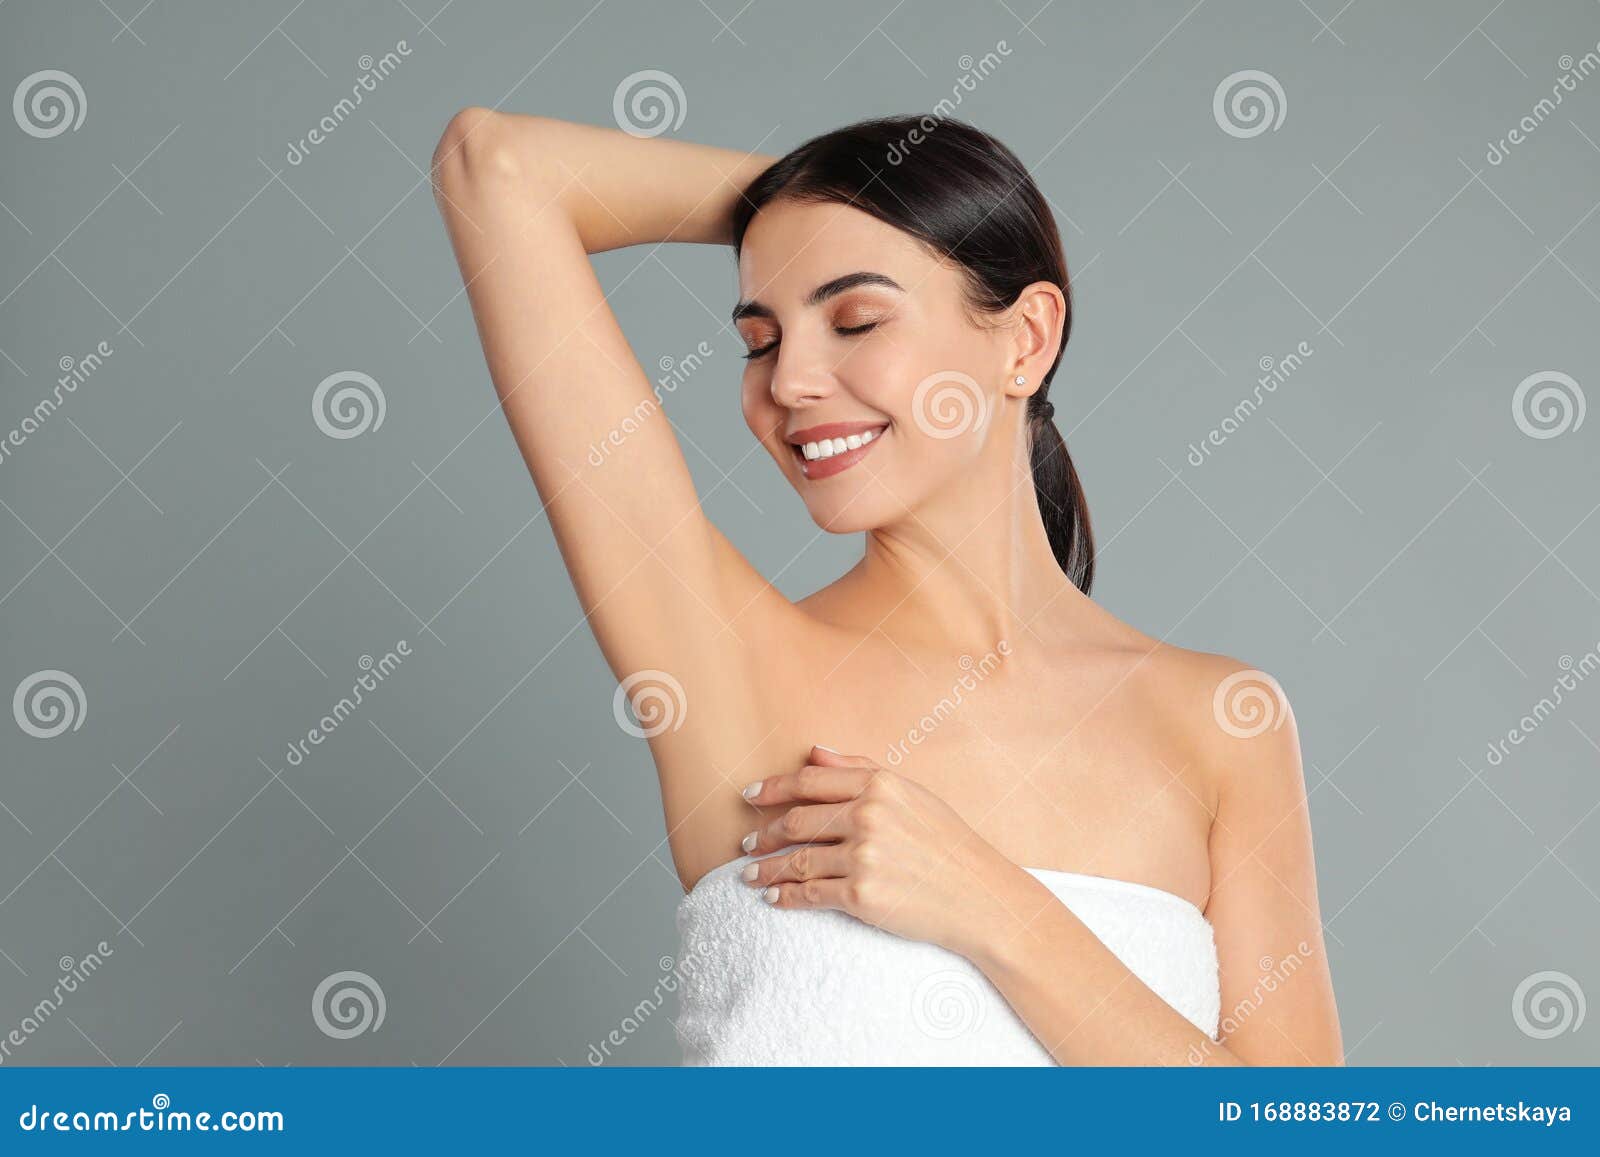 young woman showing hairless armpit after epilation procedure on background